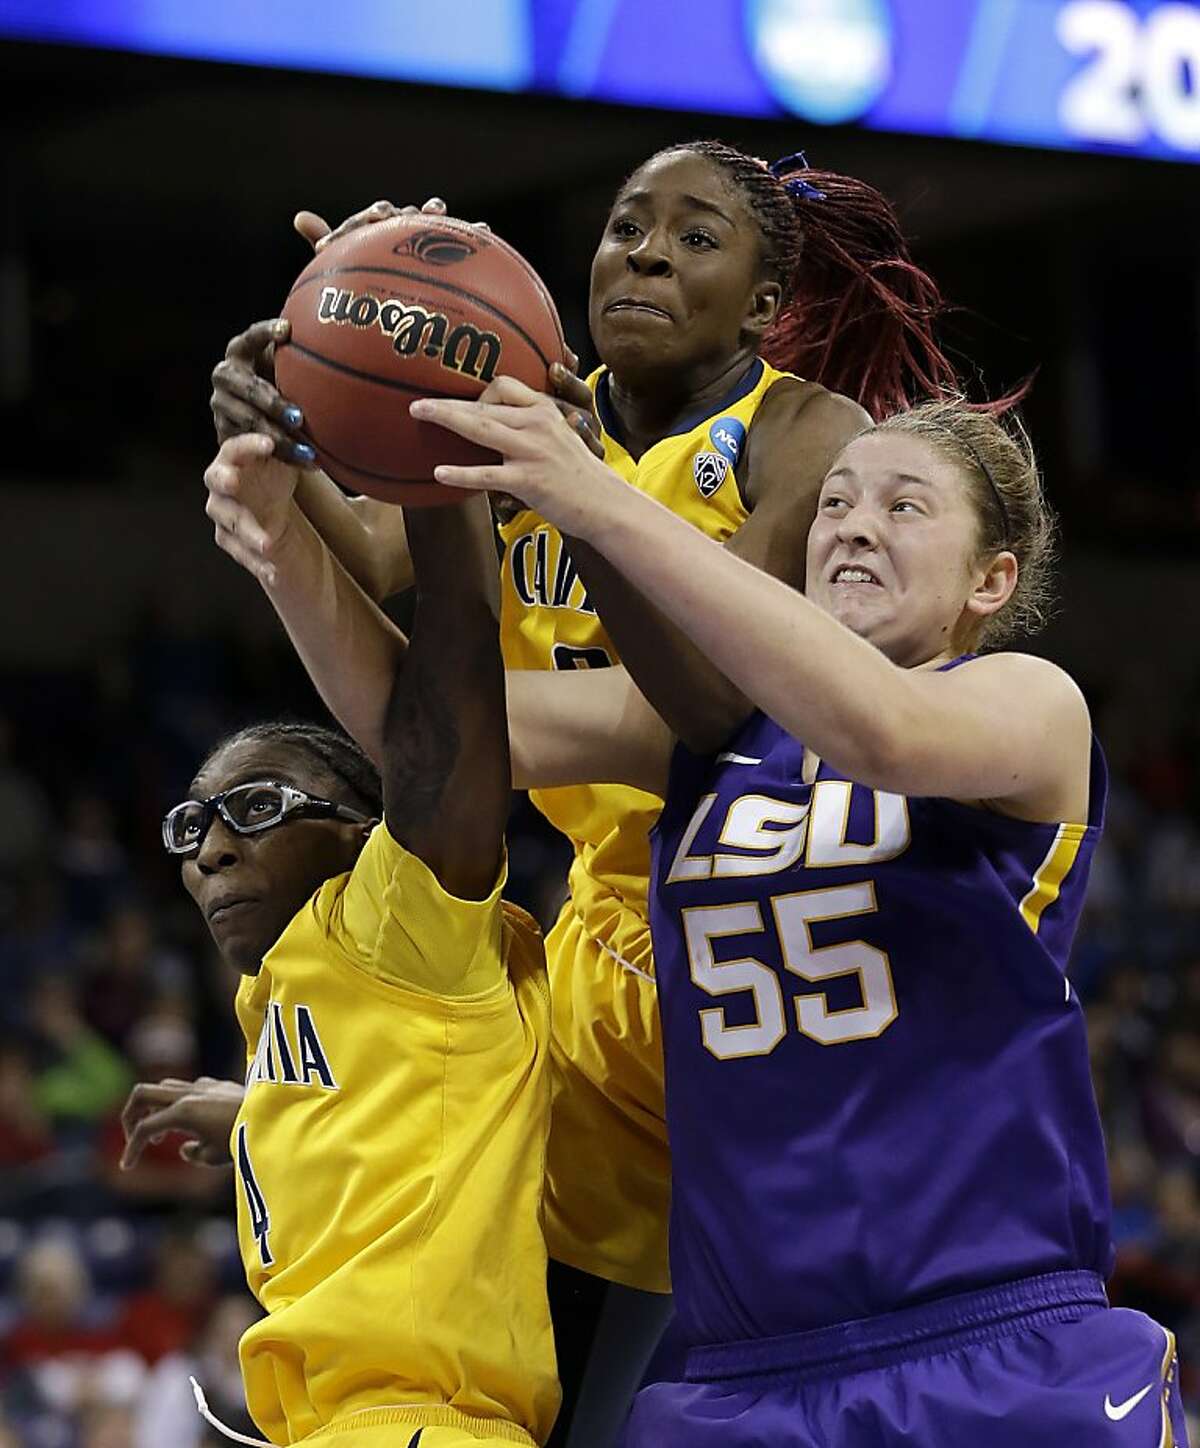 LSU's Theresa Plaisance (55) battles California's Avigiel Cohen, left, and Gennifer Brandon for a loose ball in the second half of a regional semifinal game in the NCAA women's college basketball tournament Saturday, March 30, 2013, in Spokane, Wash. (AP Photo/Elaine Thompson)